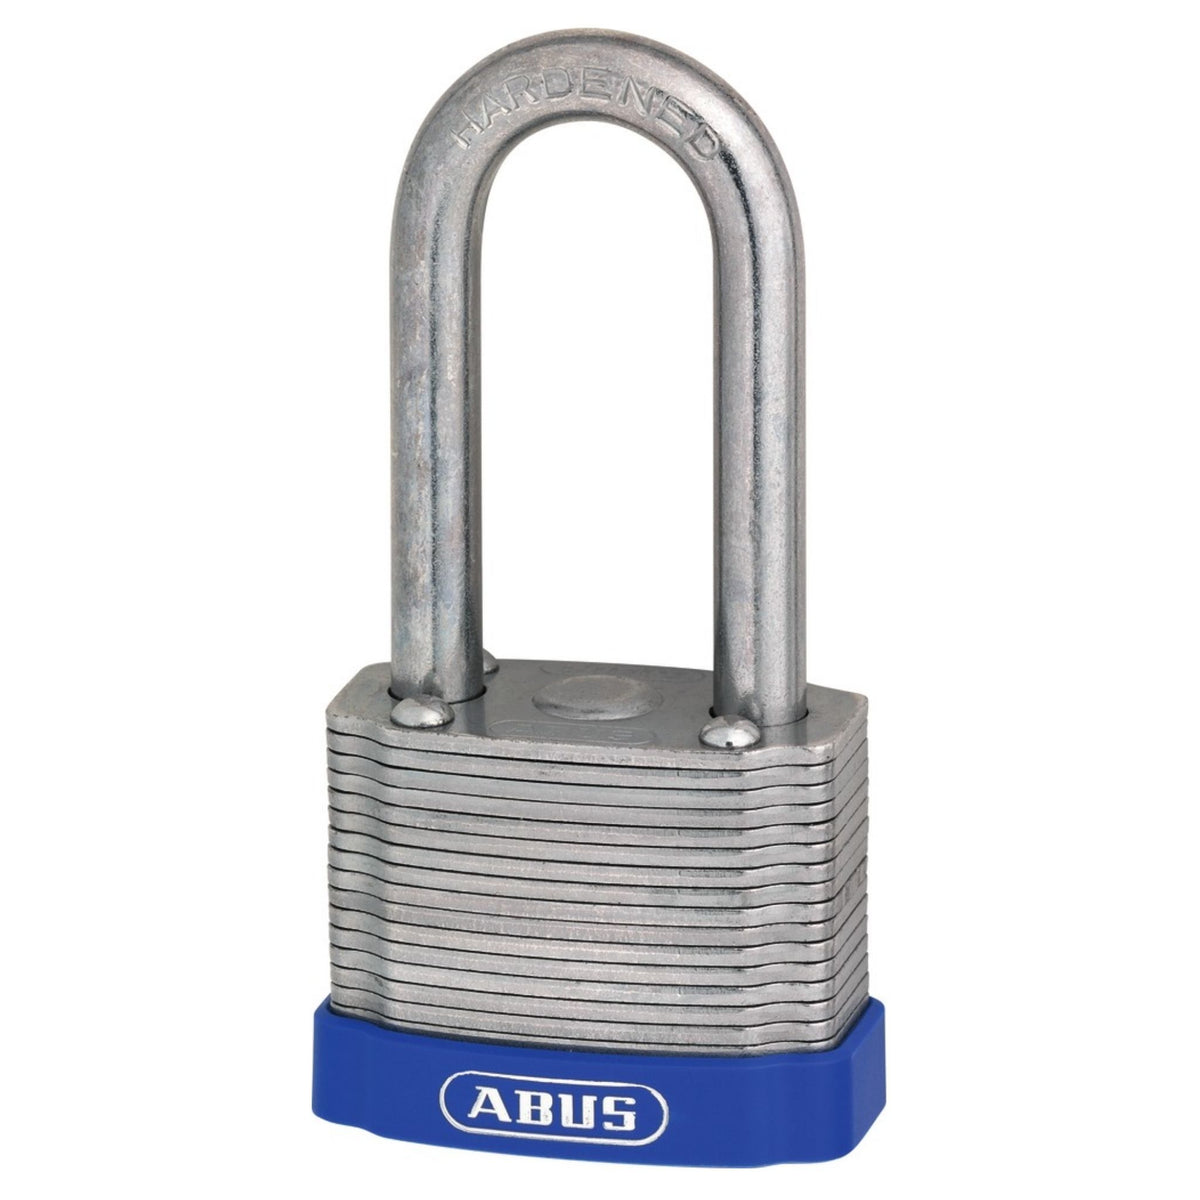 Abus 4150/HB50 KD Laminated Steel Lock with Eterna Coating and 2-Inch Shackle Keyed Different Locks - The Lock Source